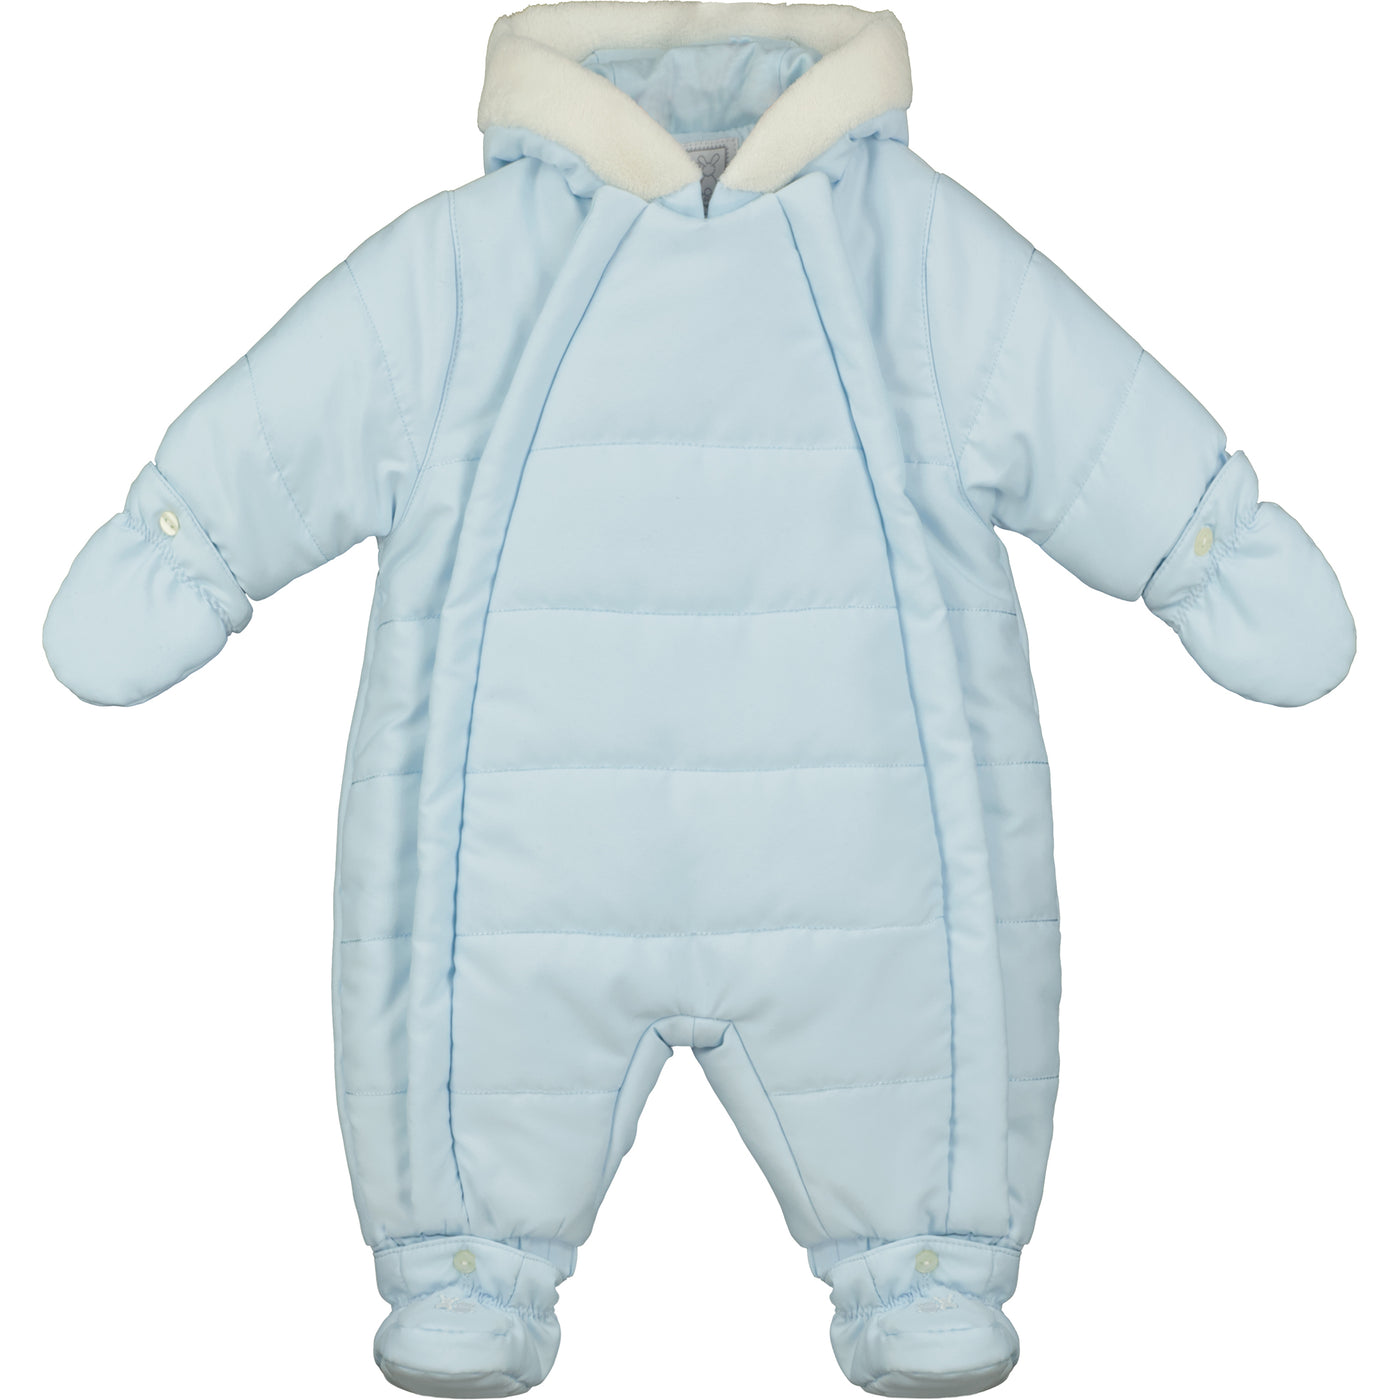 Ernie Boys Pramsuit with Mitts & Booties